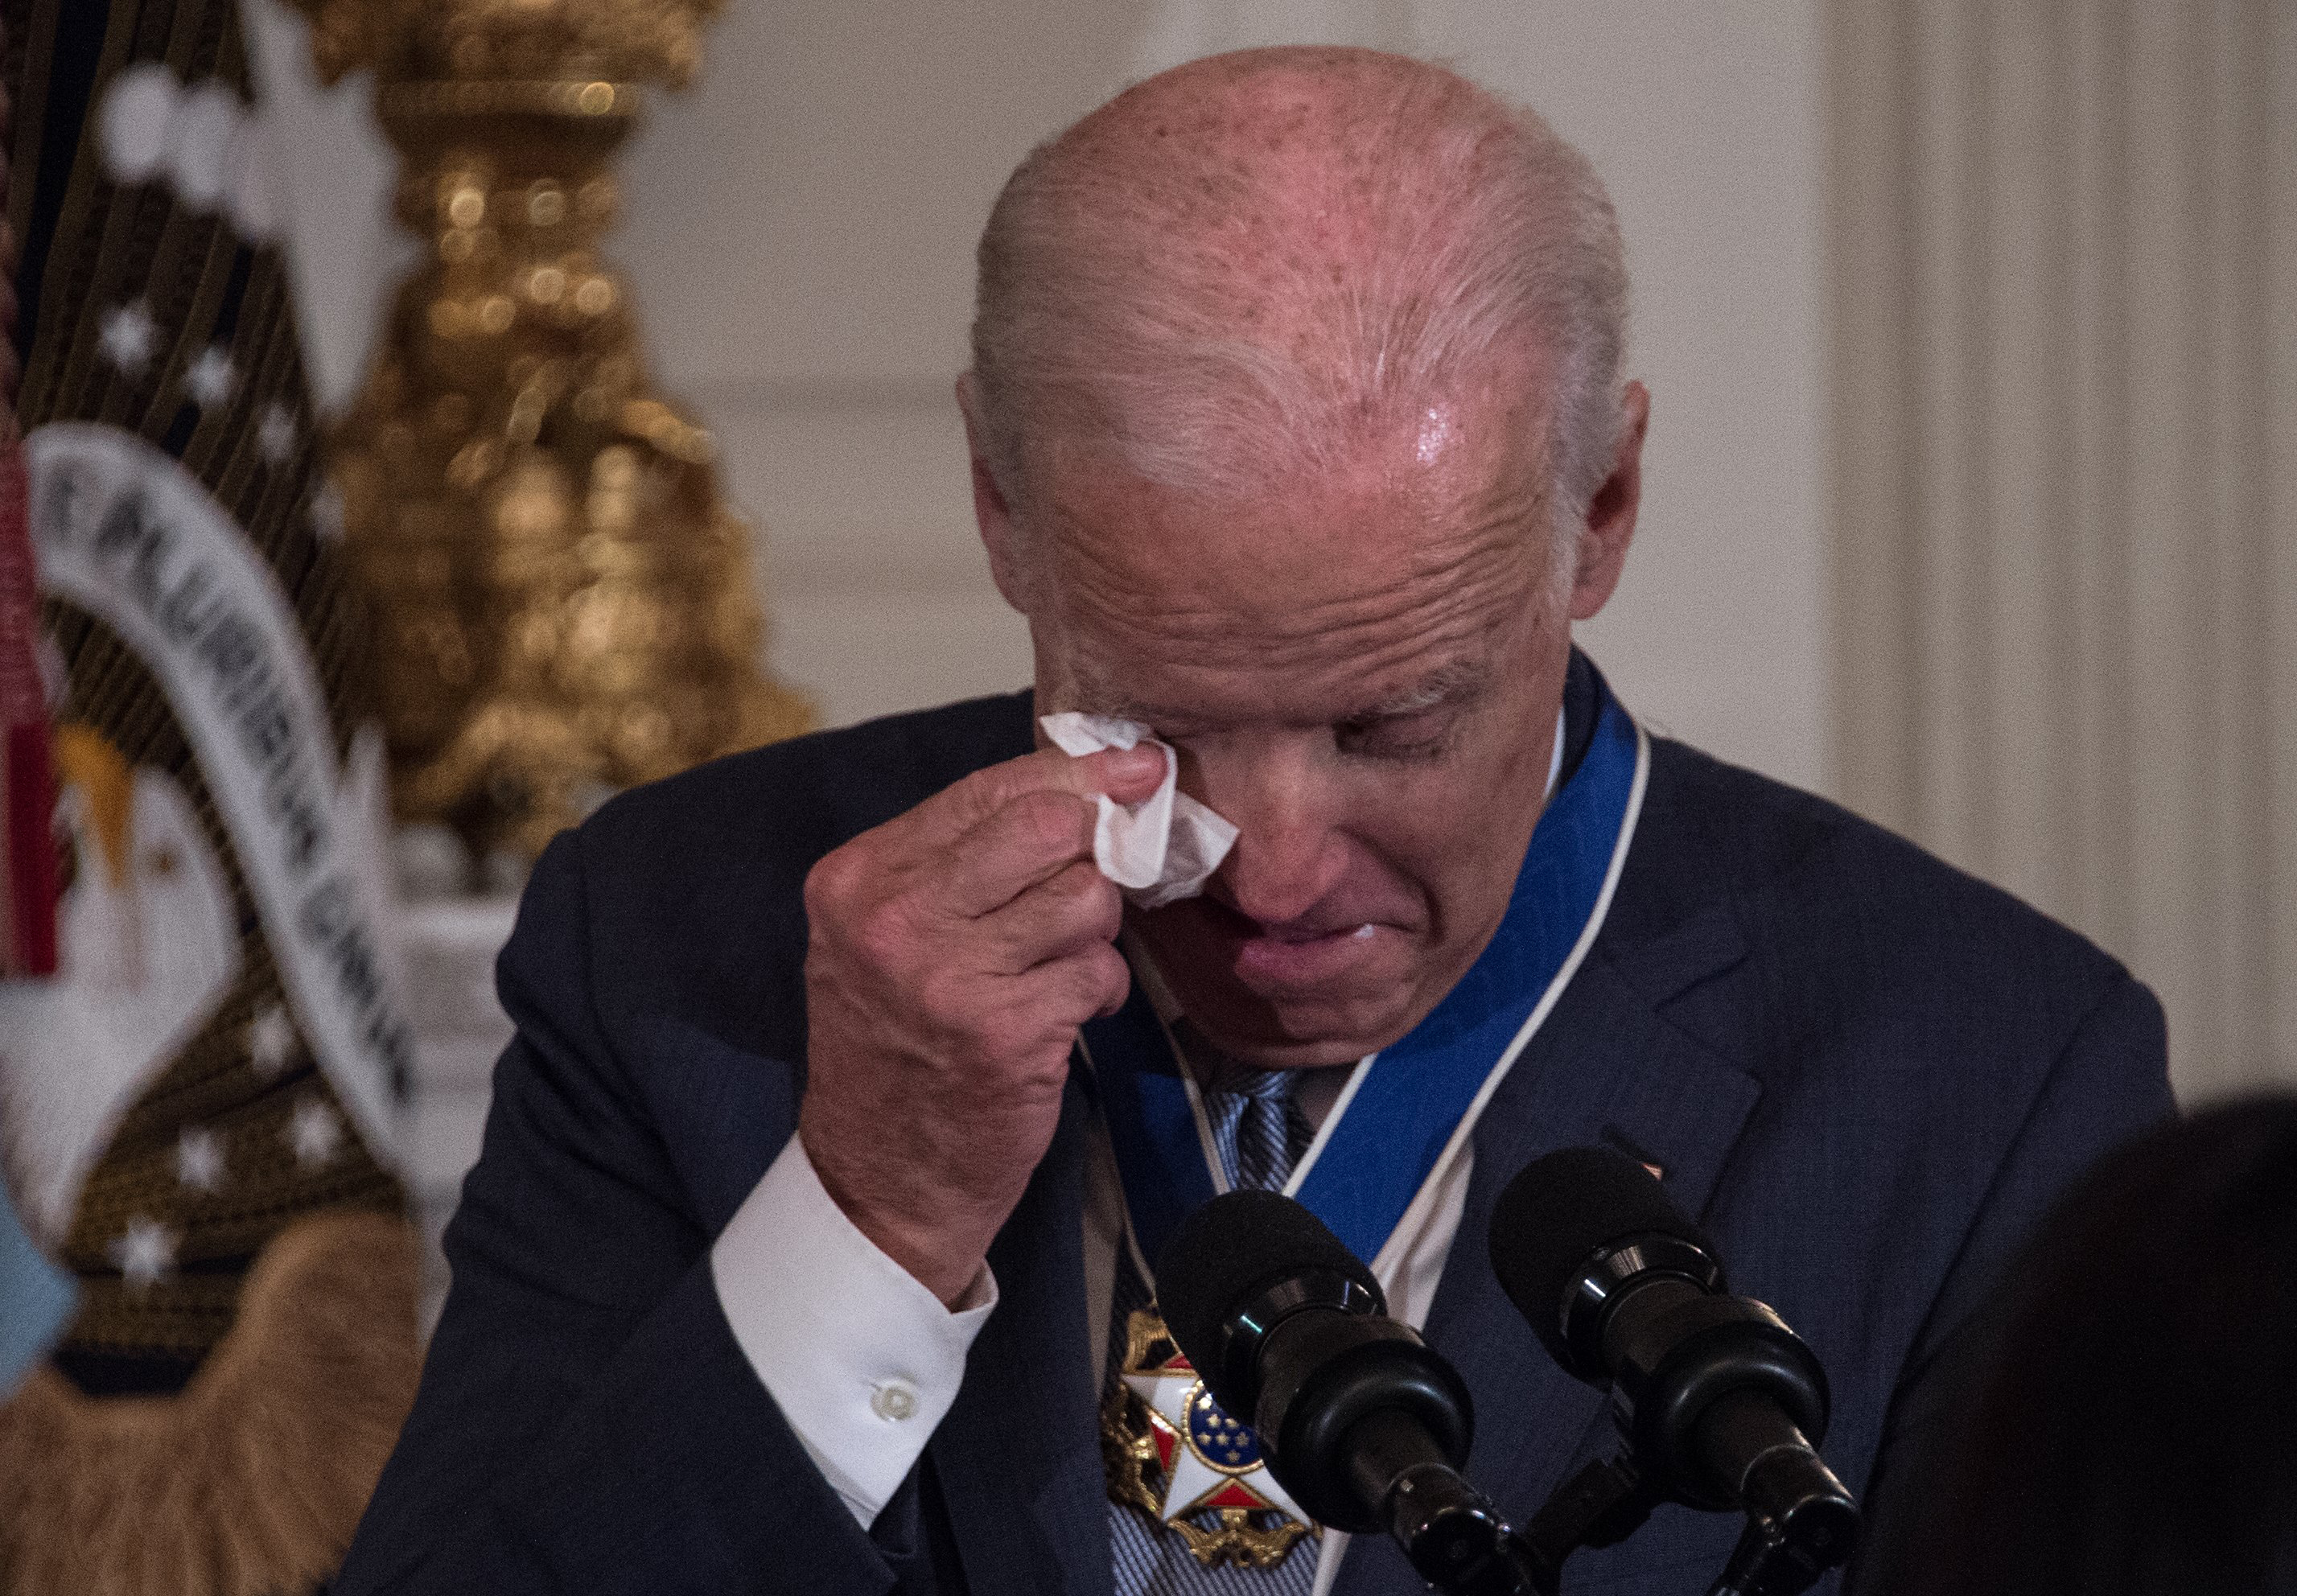 US Vice President Joe Biden wipes away tears after President Barack Obama awarded him the Presidential Medal of Freedom during a tribute to Biden at the White House in Washington, DC, on January 12, 2017. / AFP PHOTO / NICHOLAS KAMM